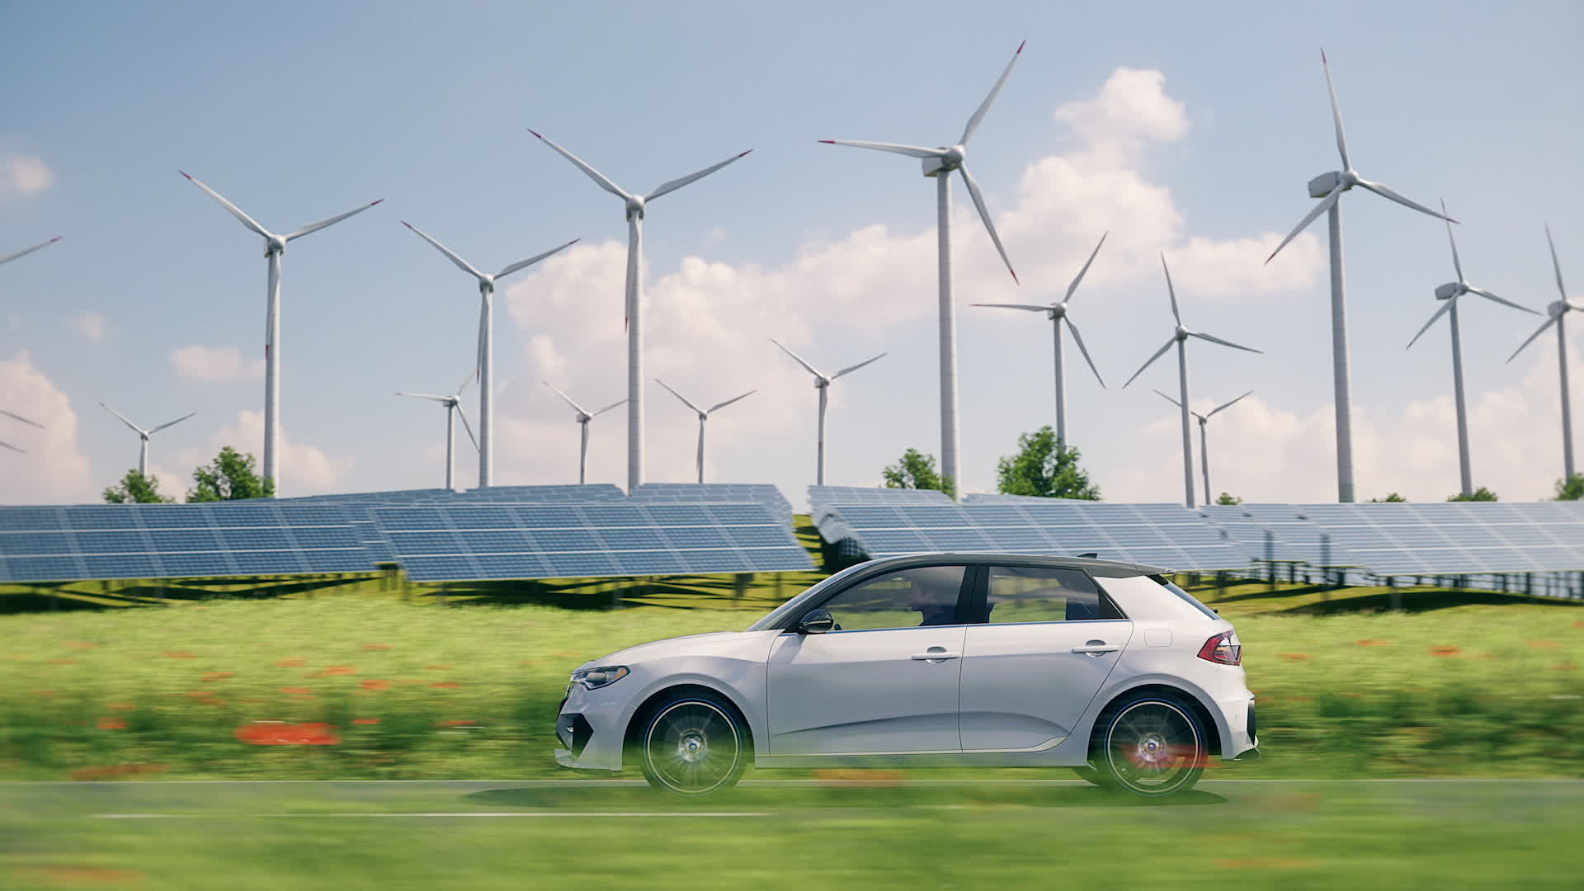 An electric car drives alongside wind turbines and solar panels, embodying sustainability and renewable energy in motion.